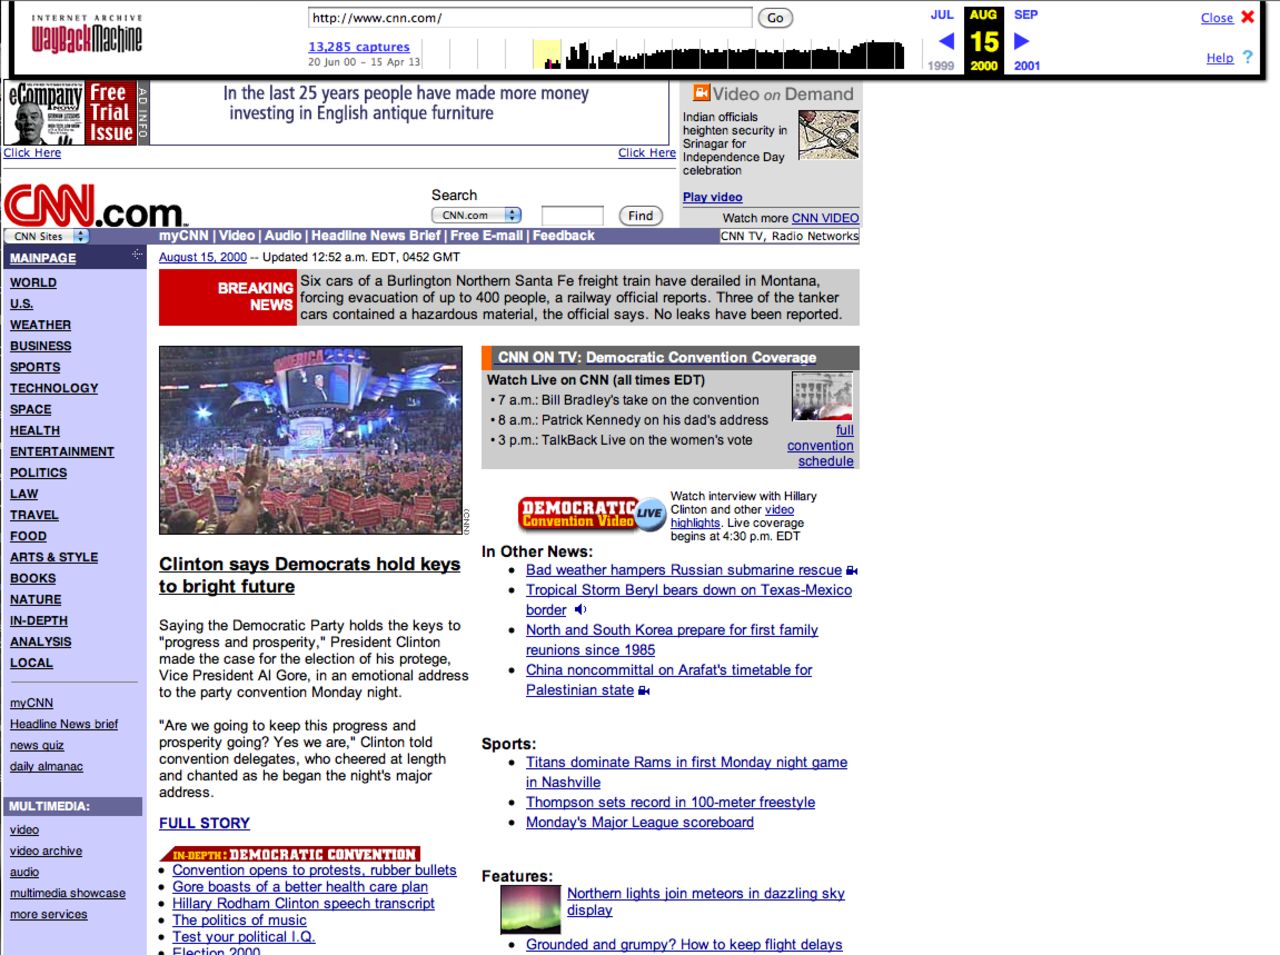 Purple and lavender accents adorned the <a href="http://www.cnn.com">CNN.com</a> homepage in August 2000. Election season was well under way.